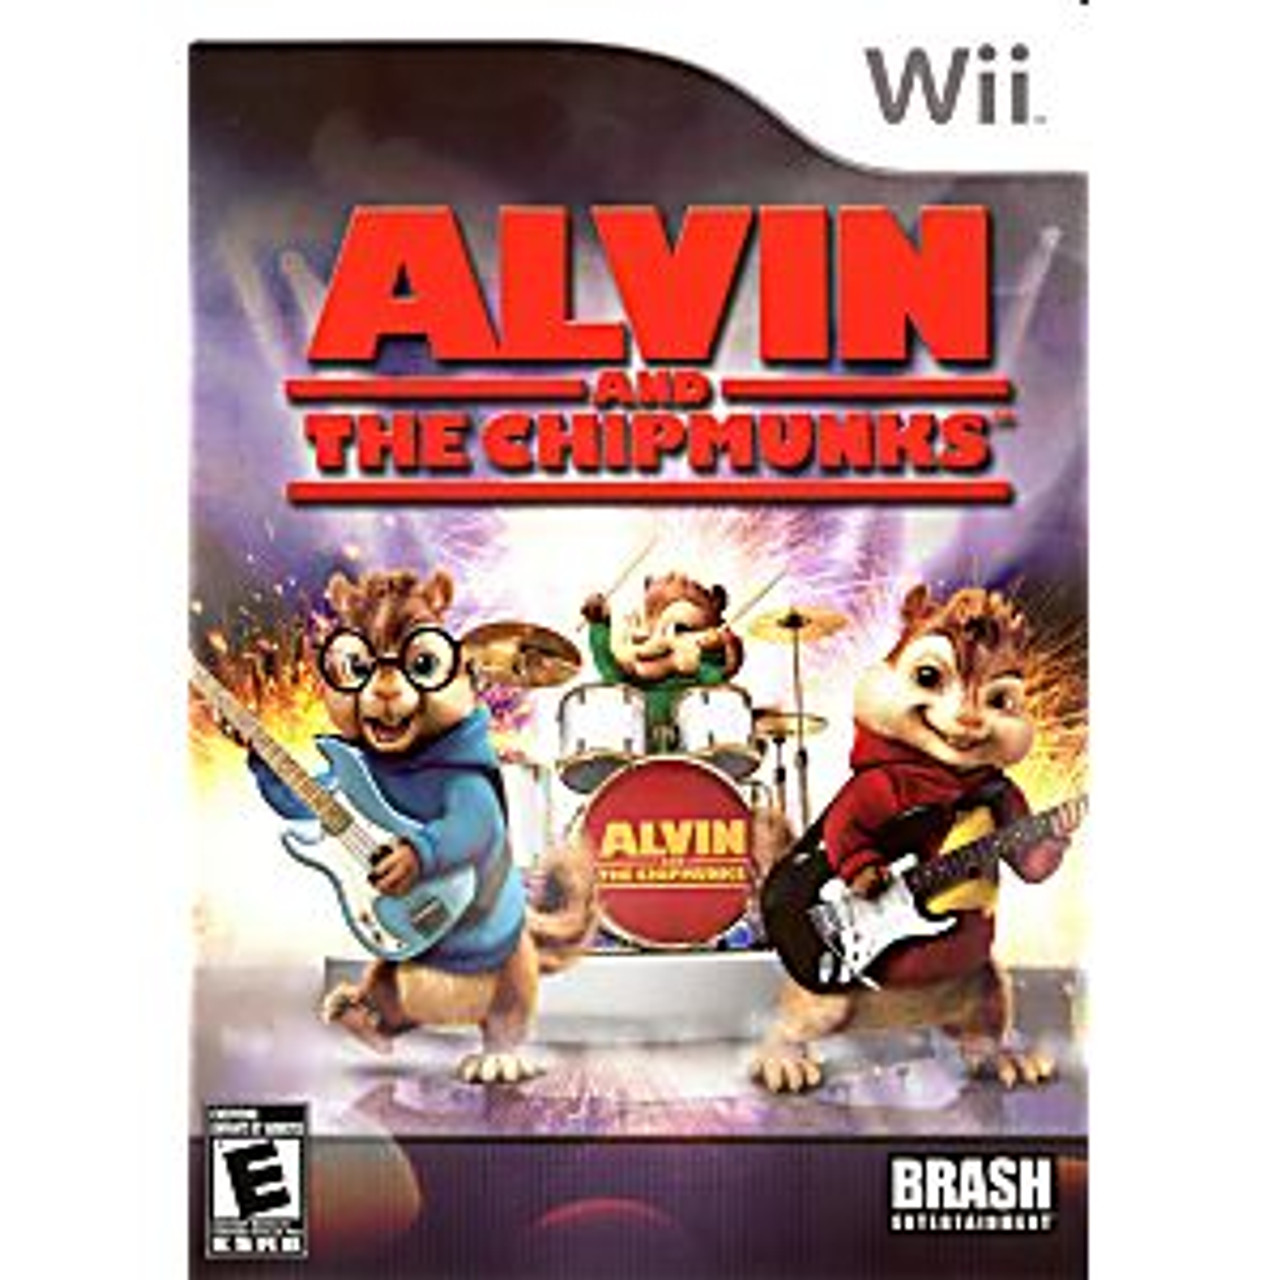 ALVIN AND THE CHIPMUNKS THE GAME (#890181002029)